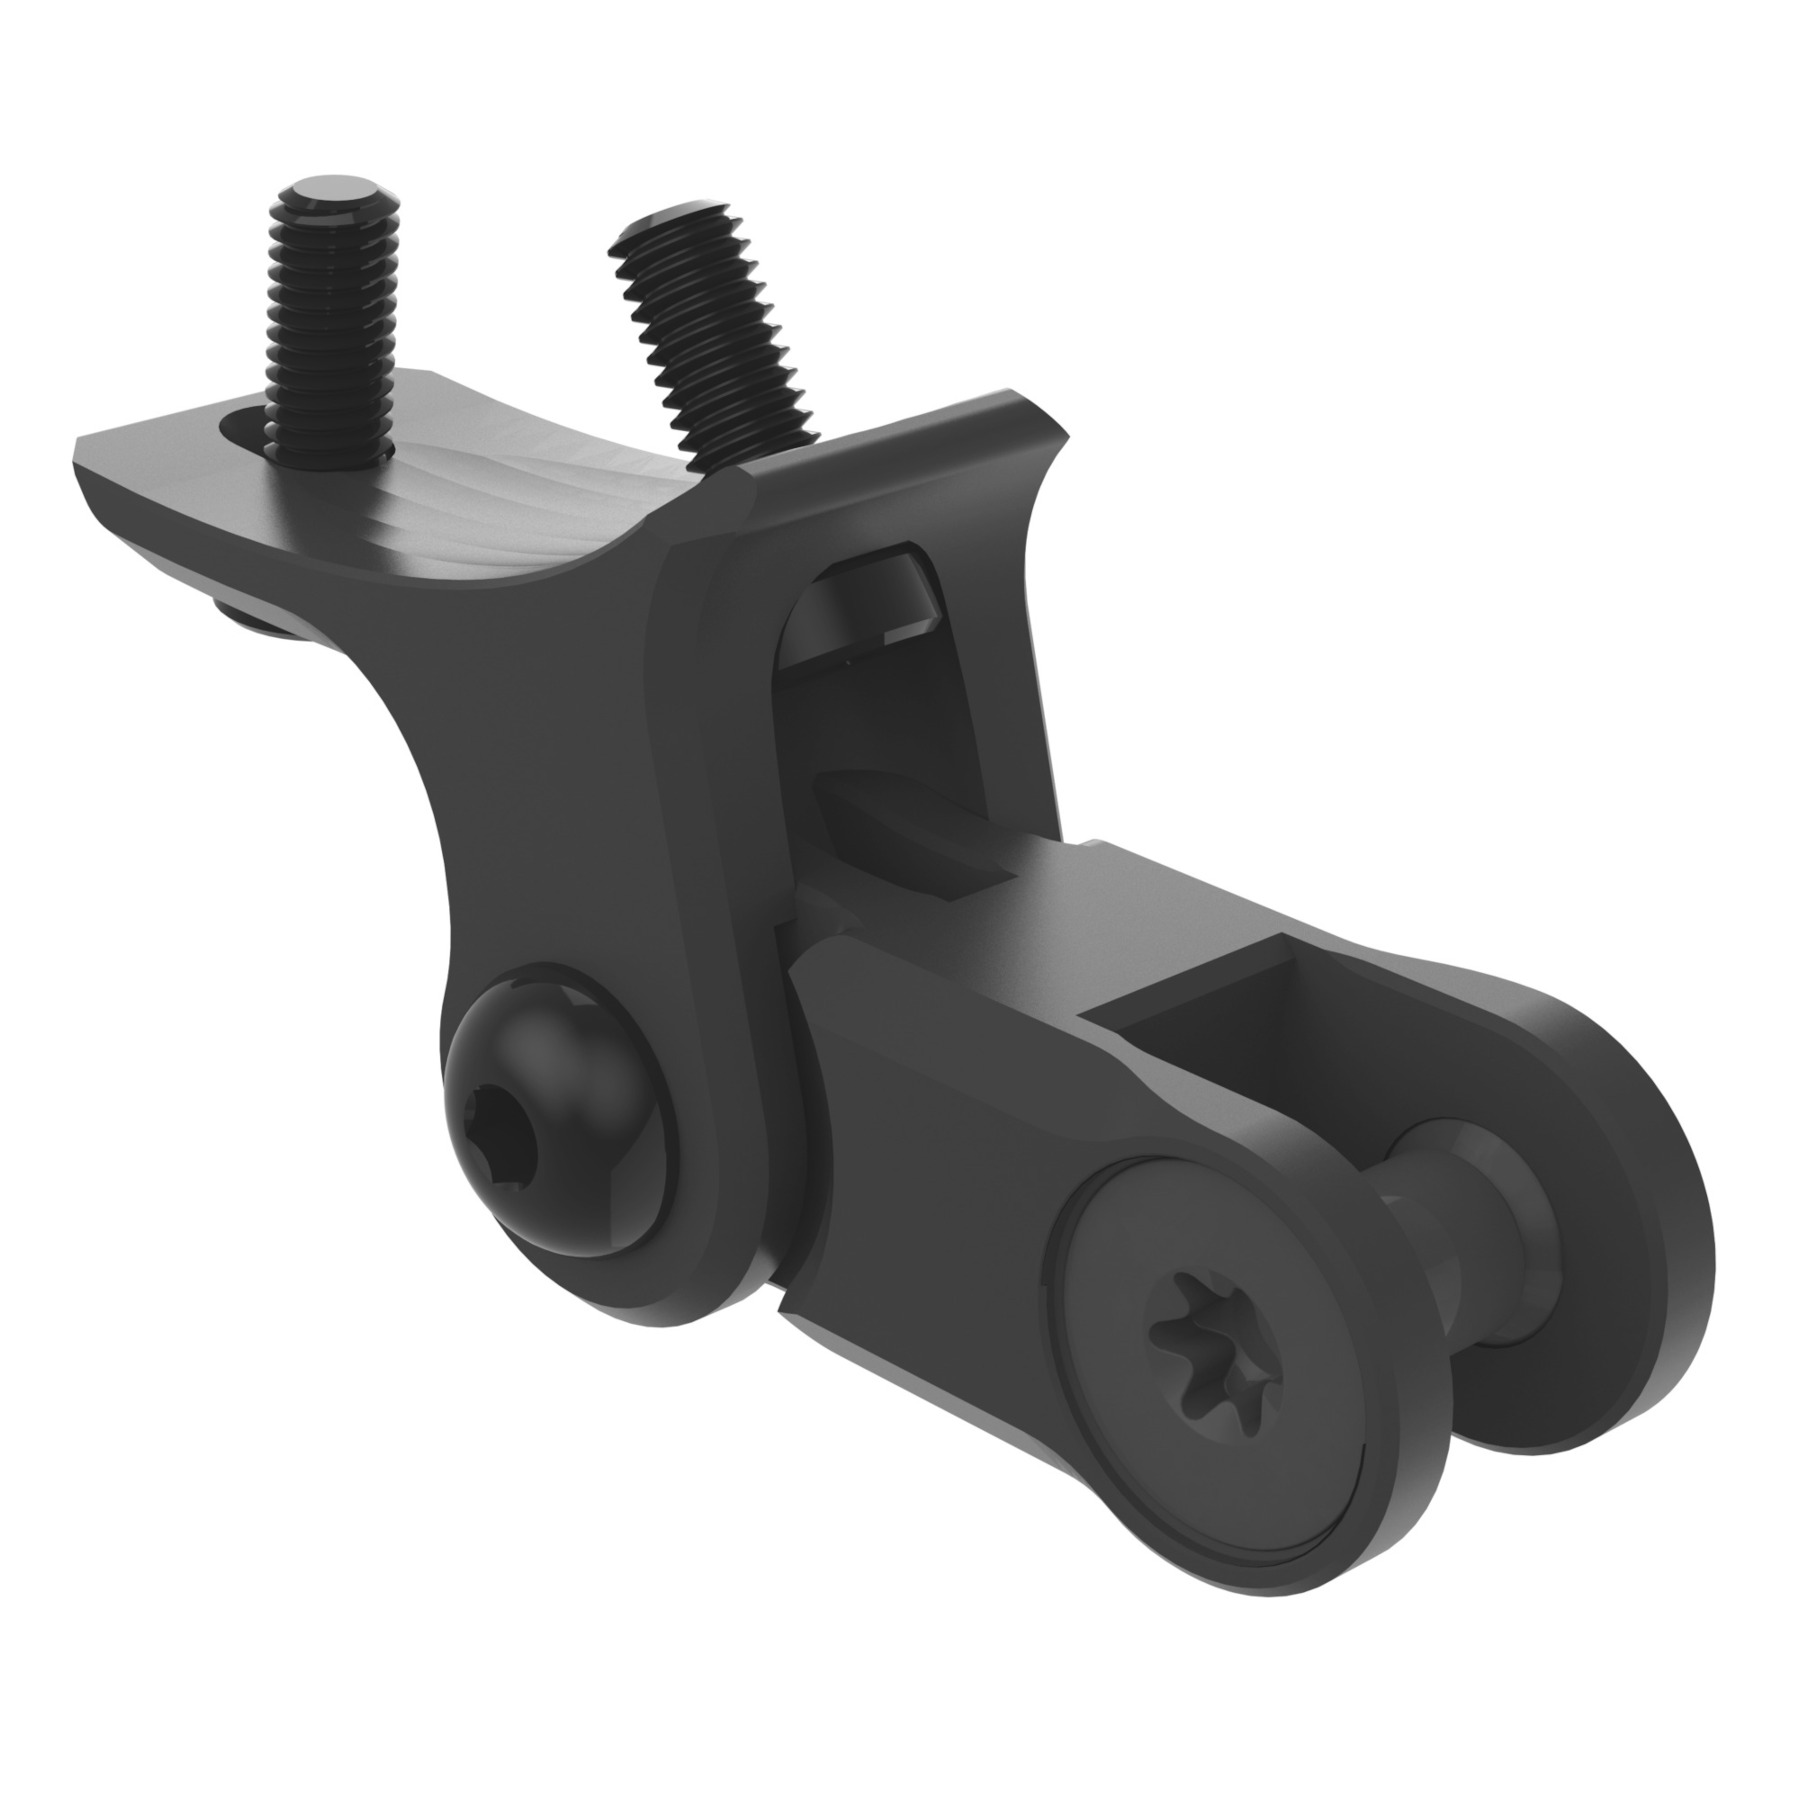 Picture of Syncros Mount for iC Handlebar / Stem Units - U-Interface | for Supernova / Roxim Lights